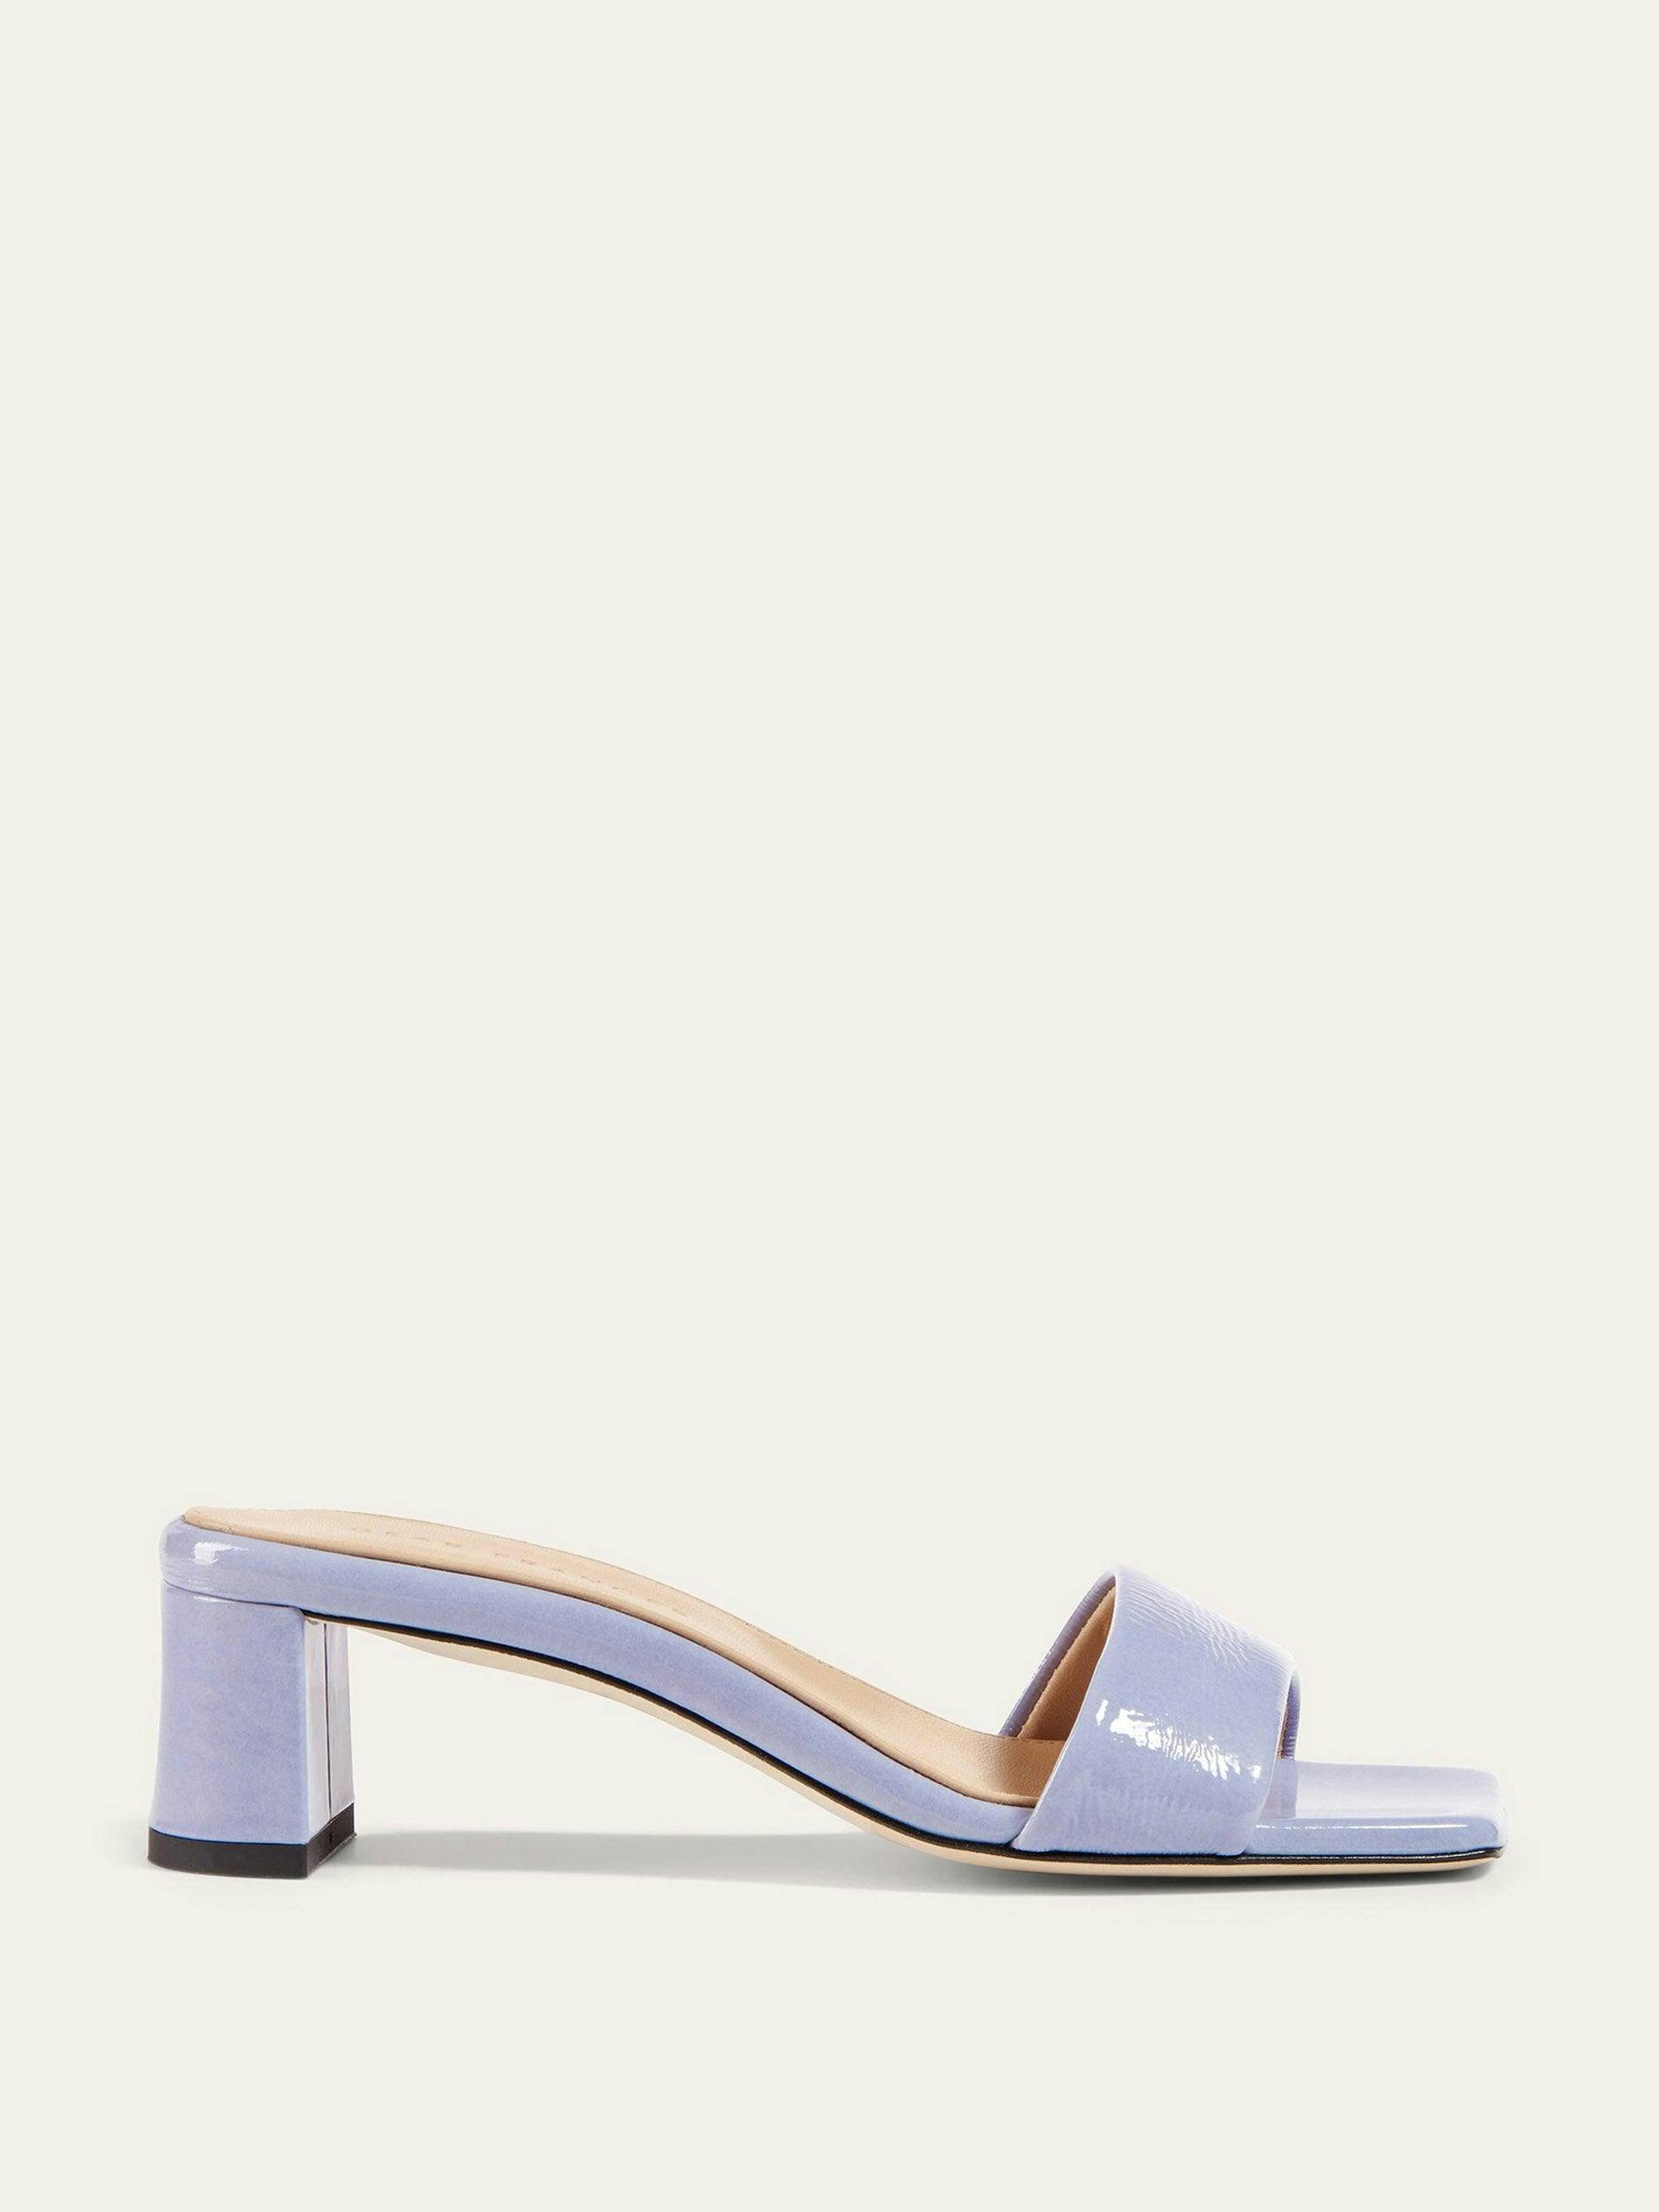 Chaise lilac mule